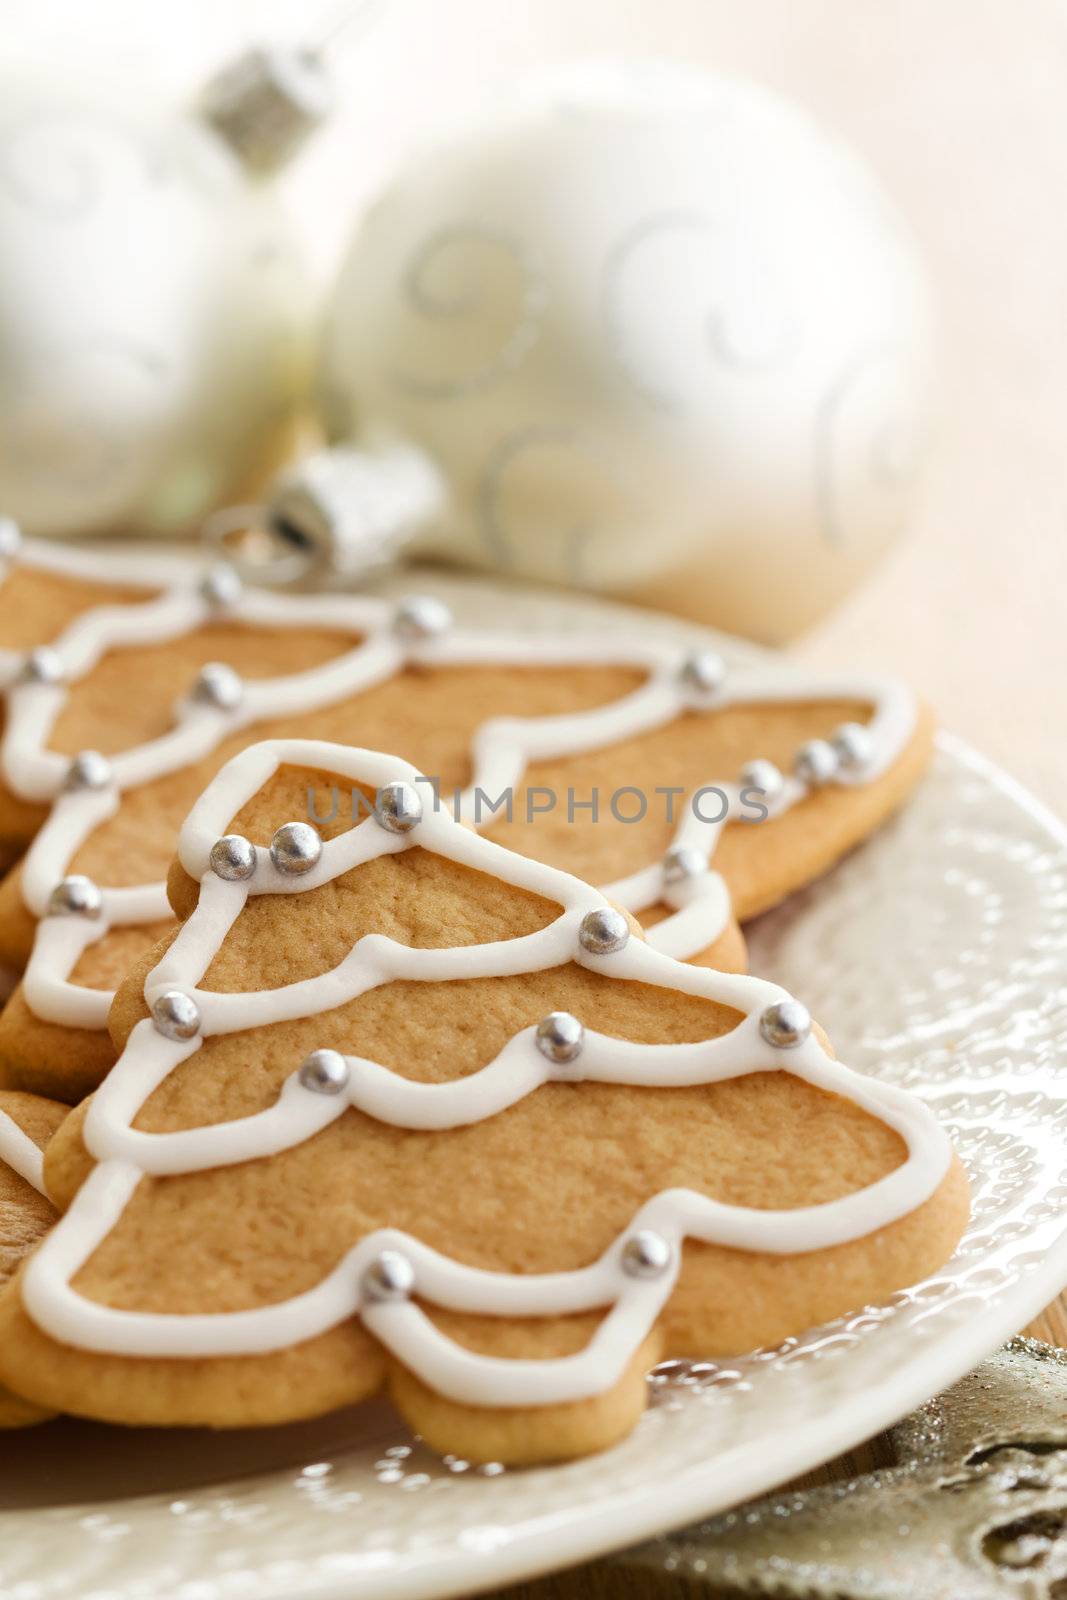 Gingerbread Christmas trees on a plate